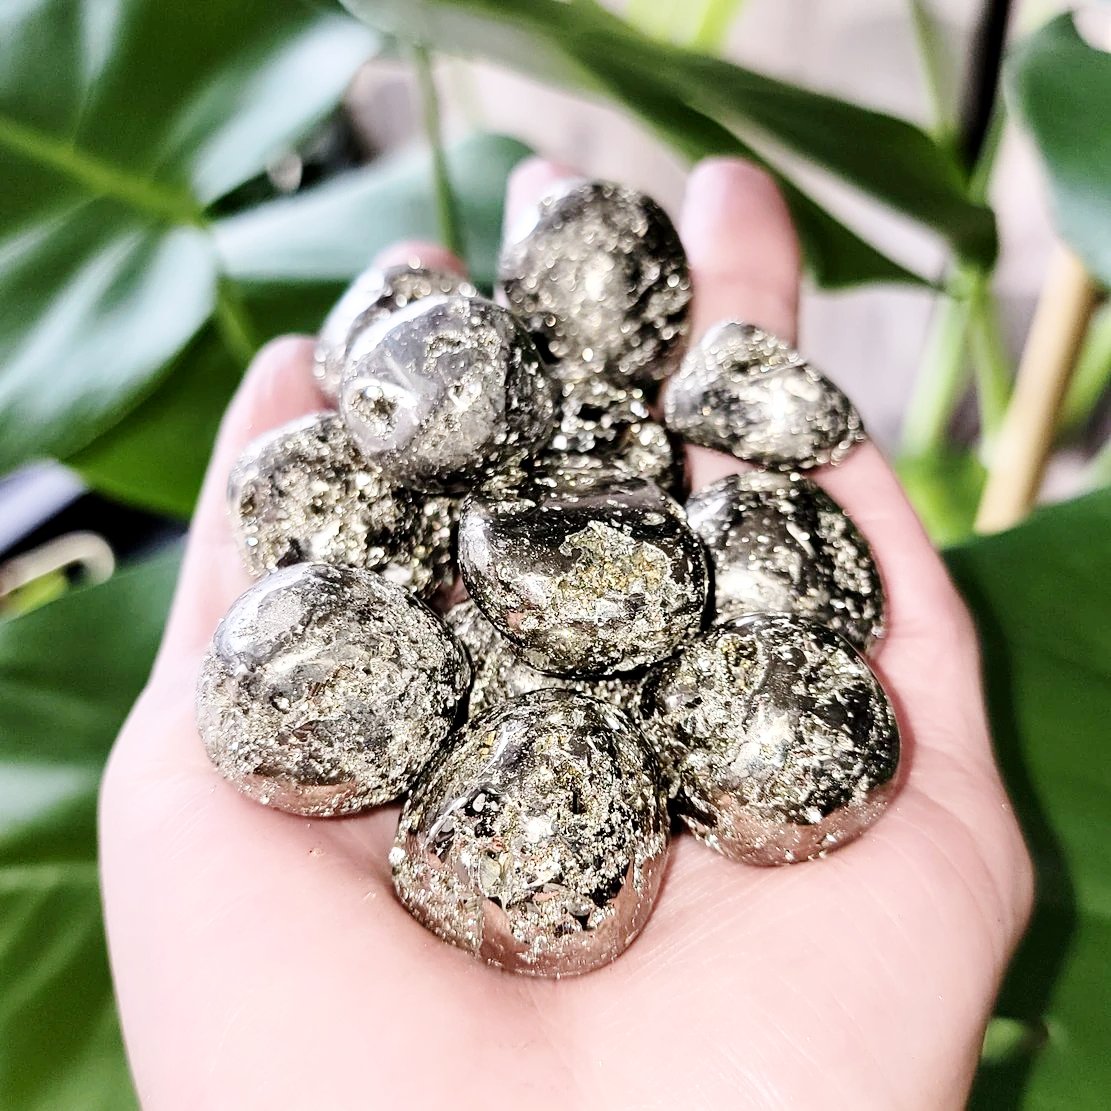 Pyrite Tumbled Stone High Quality - Elevated Metaphysical